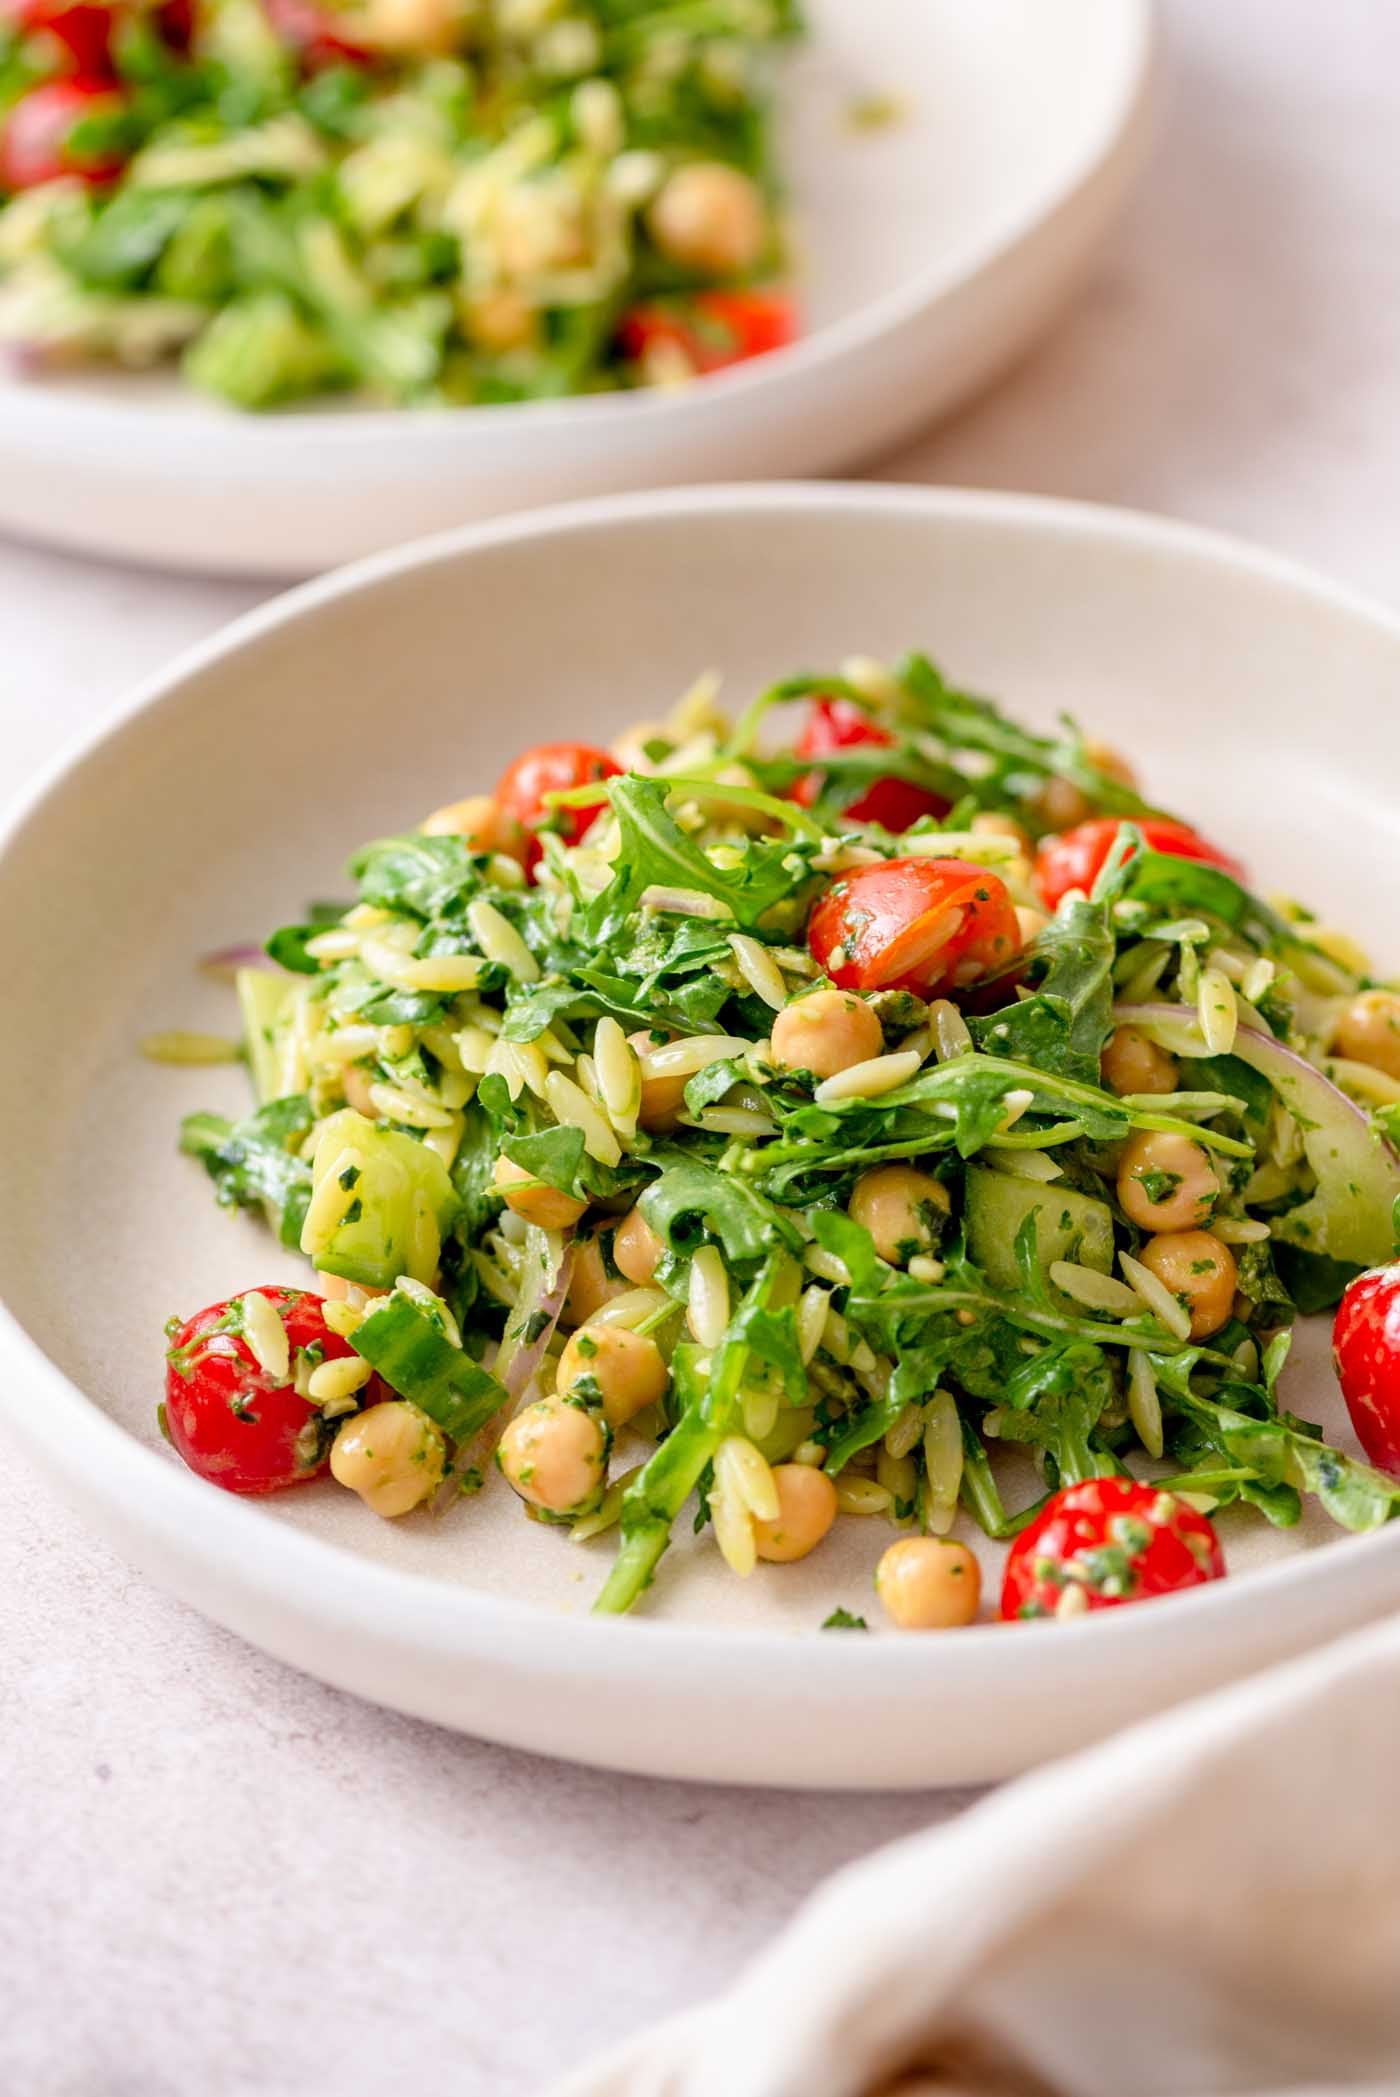 Plate of orzo pesto salad with tomatoes, arugula, red onion and chickpeas.